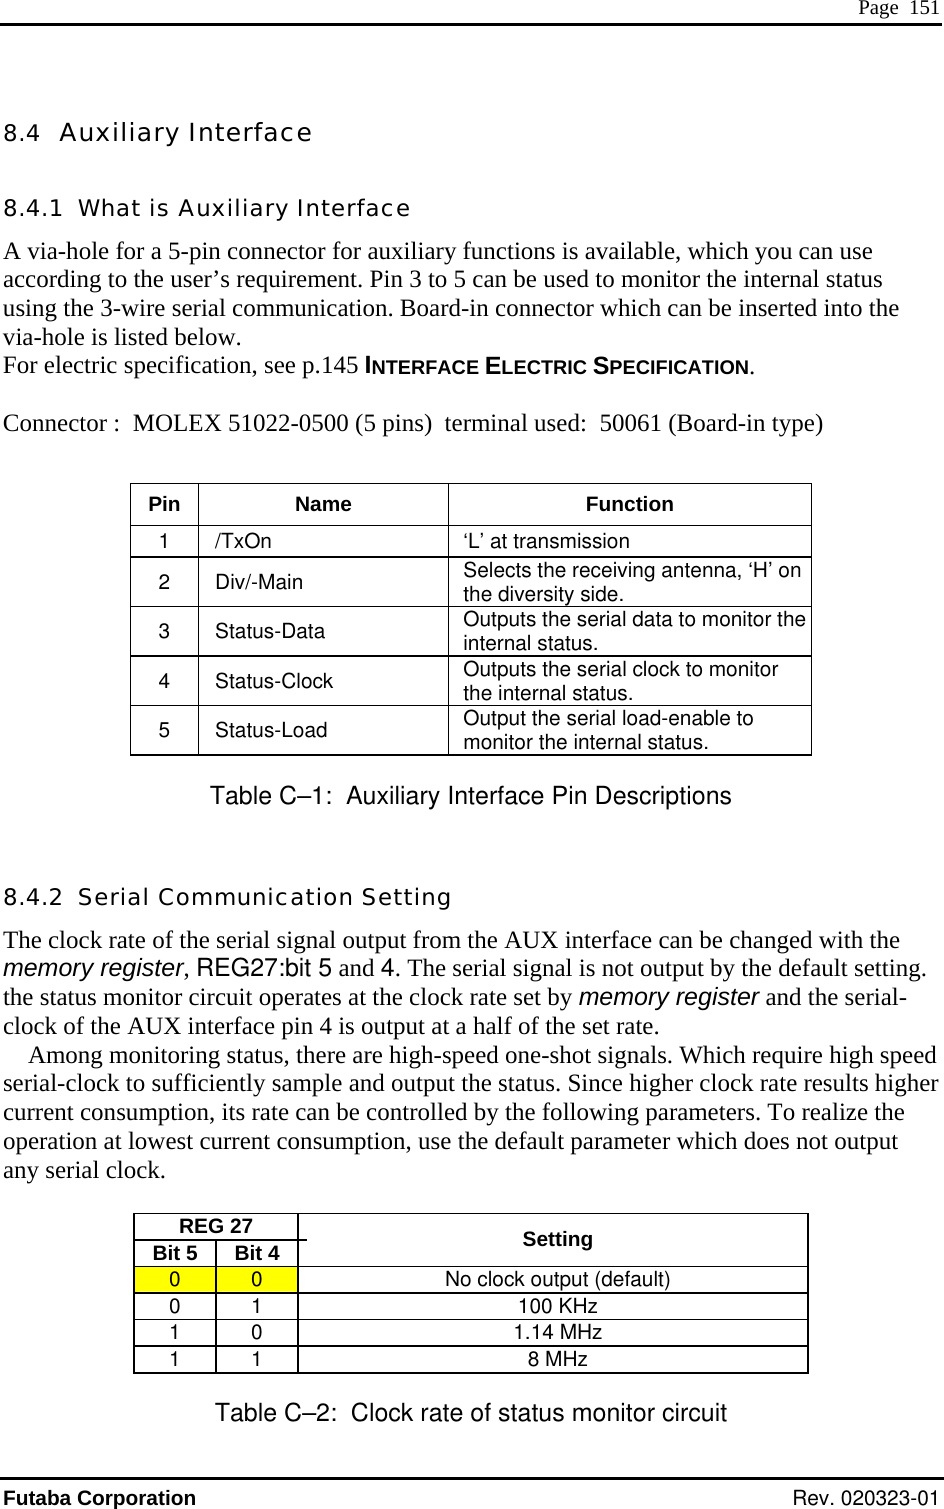  Page  151 8.4  Auxiliary Interface INTERFACE ELECTRIC SPECIFICATION.  Connector :  MOLEX 51022-0500 (5 pins)  terminal used:  50061 (Board-in type)  Pin Name  Function 8.4.1  What is Auxiliary Interface A via-hole for a 5-pin connector for auxiliary functions is available, which you can use according to the user’s requirement. Pin 3 to 5 can be used to monitor the internal status using the 3-wire serial communication. Board-in connector which can be inserted into the ia-hole is listed below. vFor electric specification, see p.145 1    /TxOn  ‘L’ at transmission 2  Div/-Main  Selects the receiving antenna, ‘H’ on the diversity side. 3  Status-Data  Outputs the serial data to monitor the internal status. 4  Status-Clock  Outputs the serial clock to monitor the internal status. 5  Status-Load  Output the serial load-enable to monitor the internal status. Table C–1:  Auxiliary Interface Pin Descriptions 8.4.2  Serial Communication Setting The clock rate of the serial signal output from the AUX interface can be changed with the memory register, REG27:bit 5 and 4. The serial signal is not output by the default setting.   the status monitor circuit operates at the clock rate set by memory register and the serial-clock of the AUX interface pin 4 is output at a half of the set rate. Among monitoring status, there are high-speed one-shot signals. Which require high speed serial-clock to sufficiently sample and output the status. Since higher clock rate results higher current consumption, its rate can be controlled by the following parameters. To realize the operation at lowest current consumption, use the default parameter which does not output any serial clock.  REG 27   Bit 5  Bit 4    Setting 0  0    No clock output (default) 0 1   100 KHz 1 0   1.14 MHz 1 1   8 MHz Table C–2:  Clock rate of status monitor circuit Futaba Corporation Rev. 020323-01 